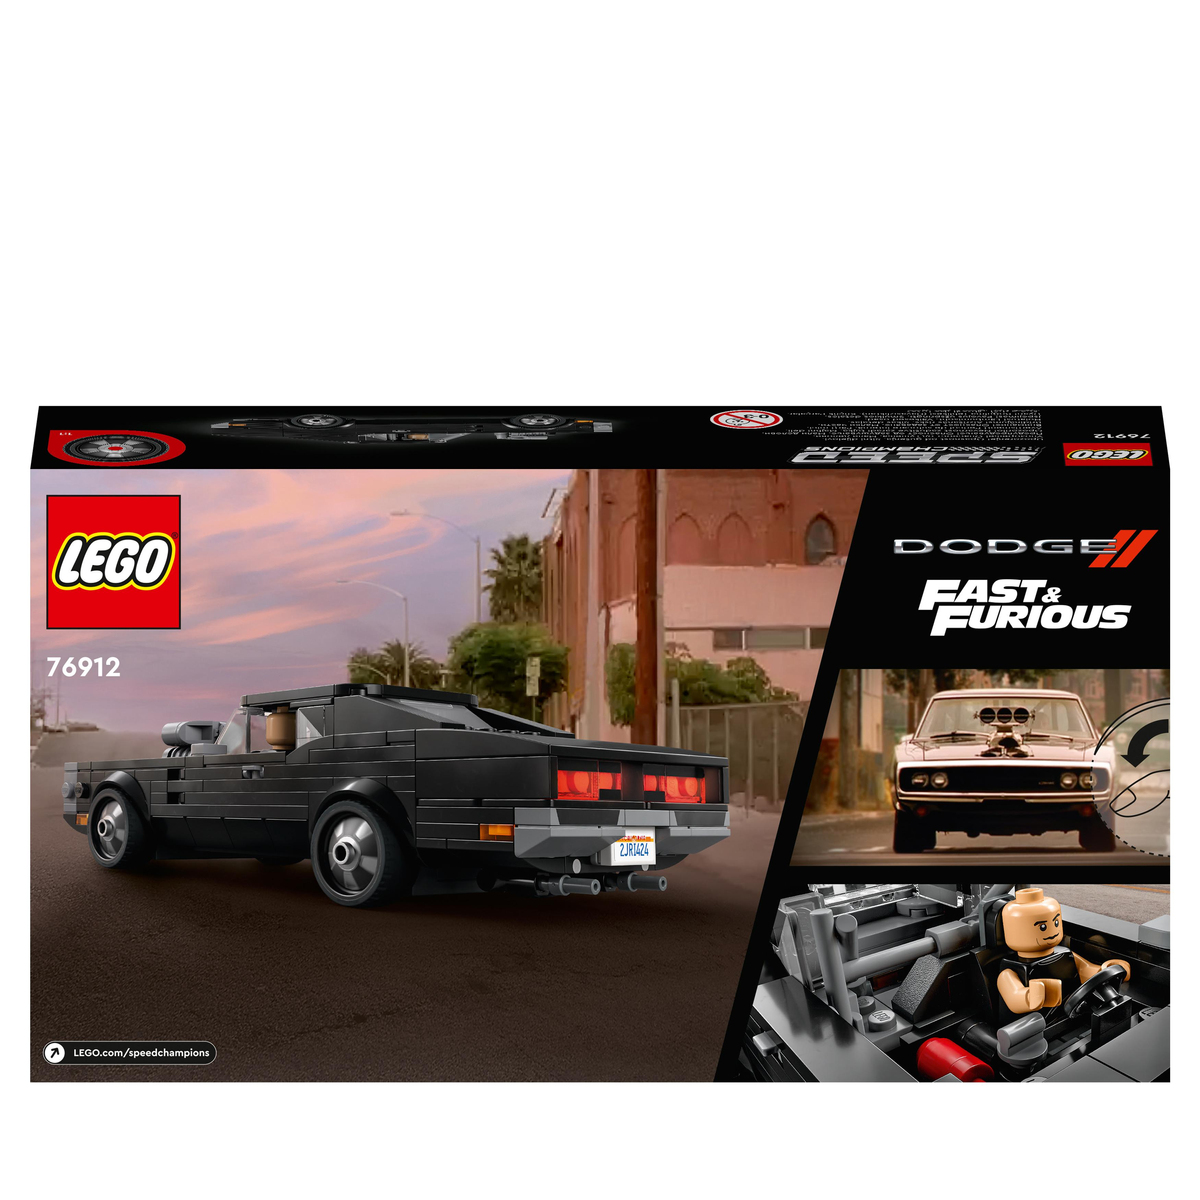 LEGO 76912 FAST & Speed DODGE R/T CHARGER FURIOUS LEGO 1970 Champions